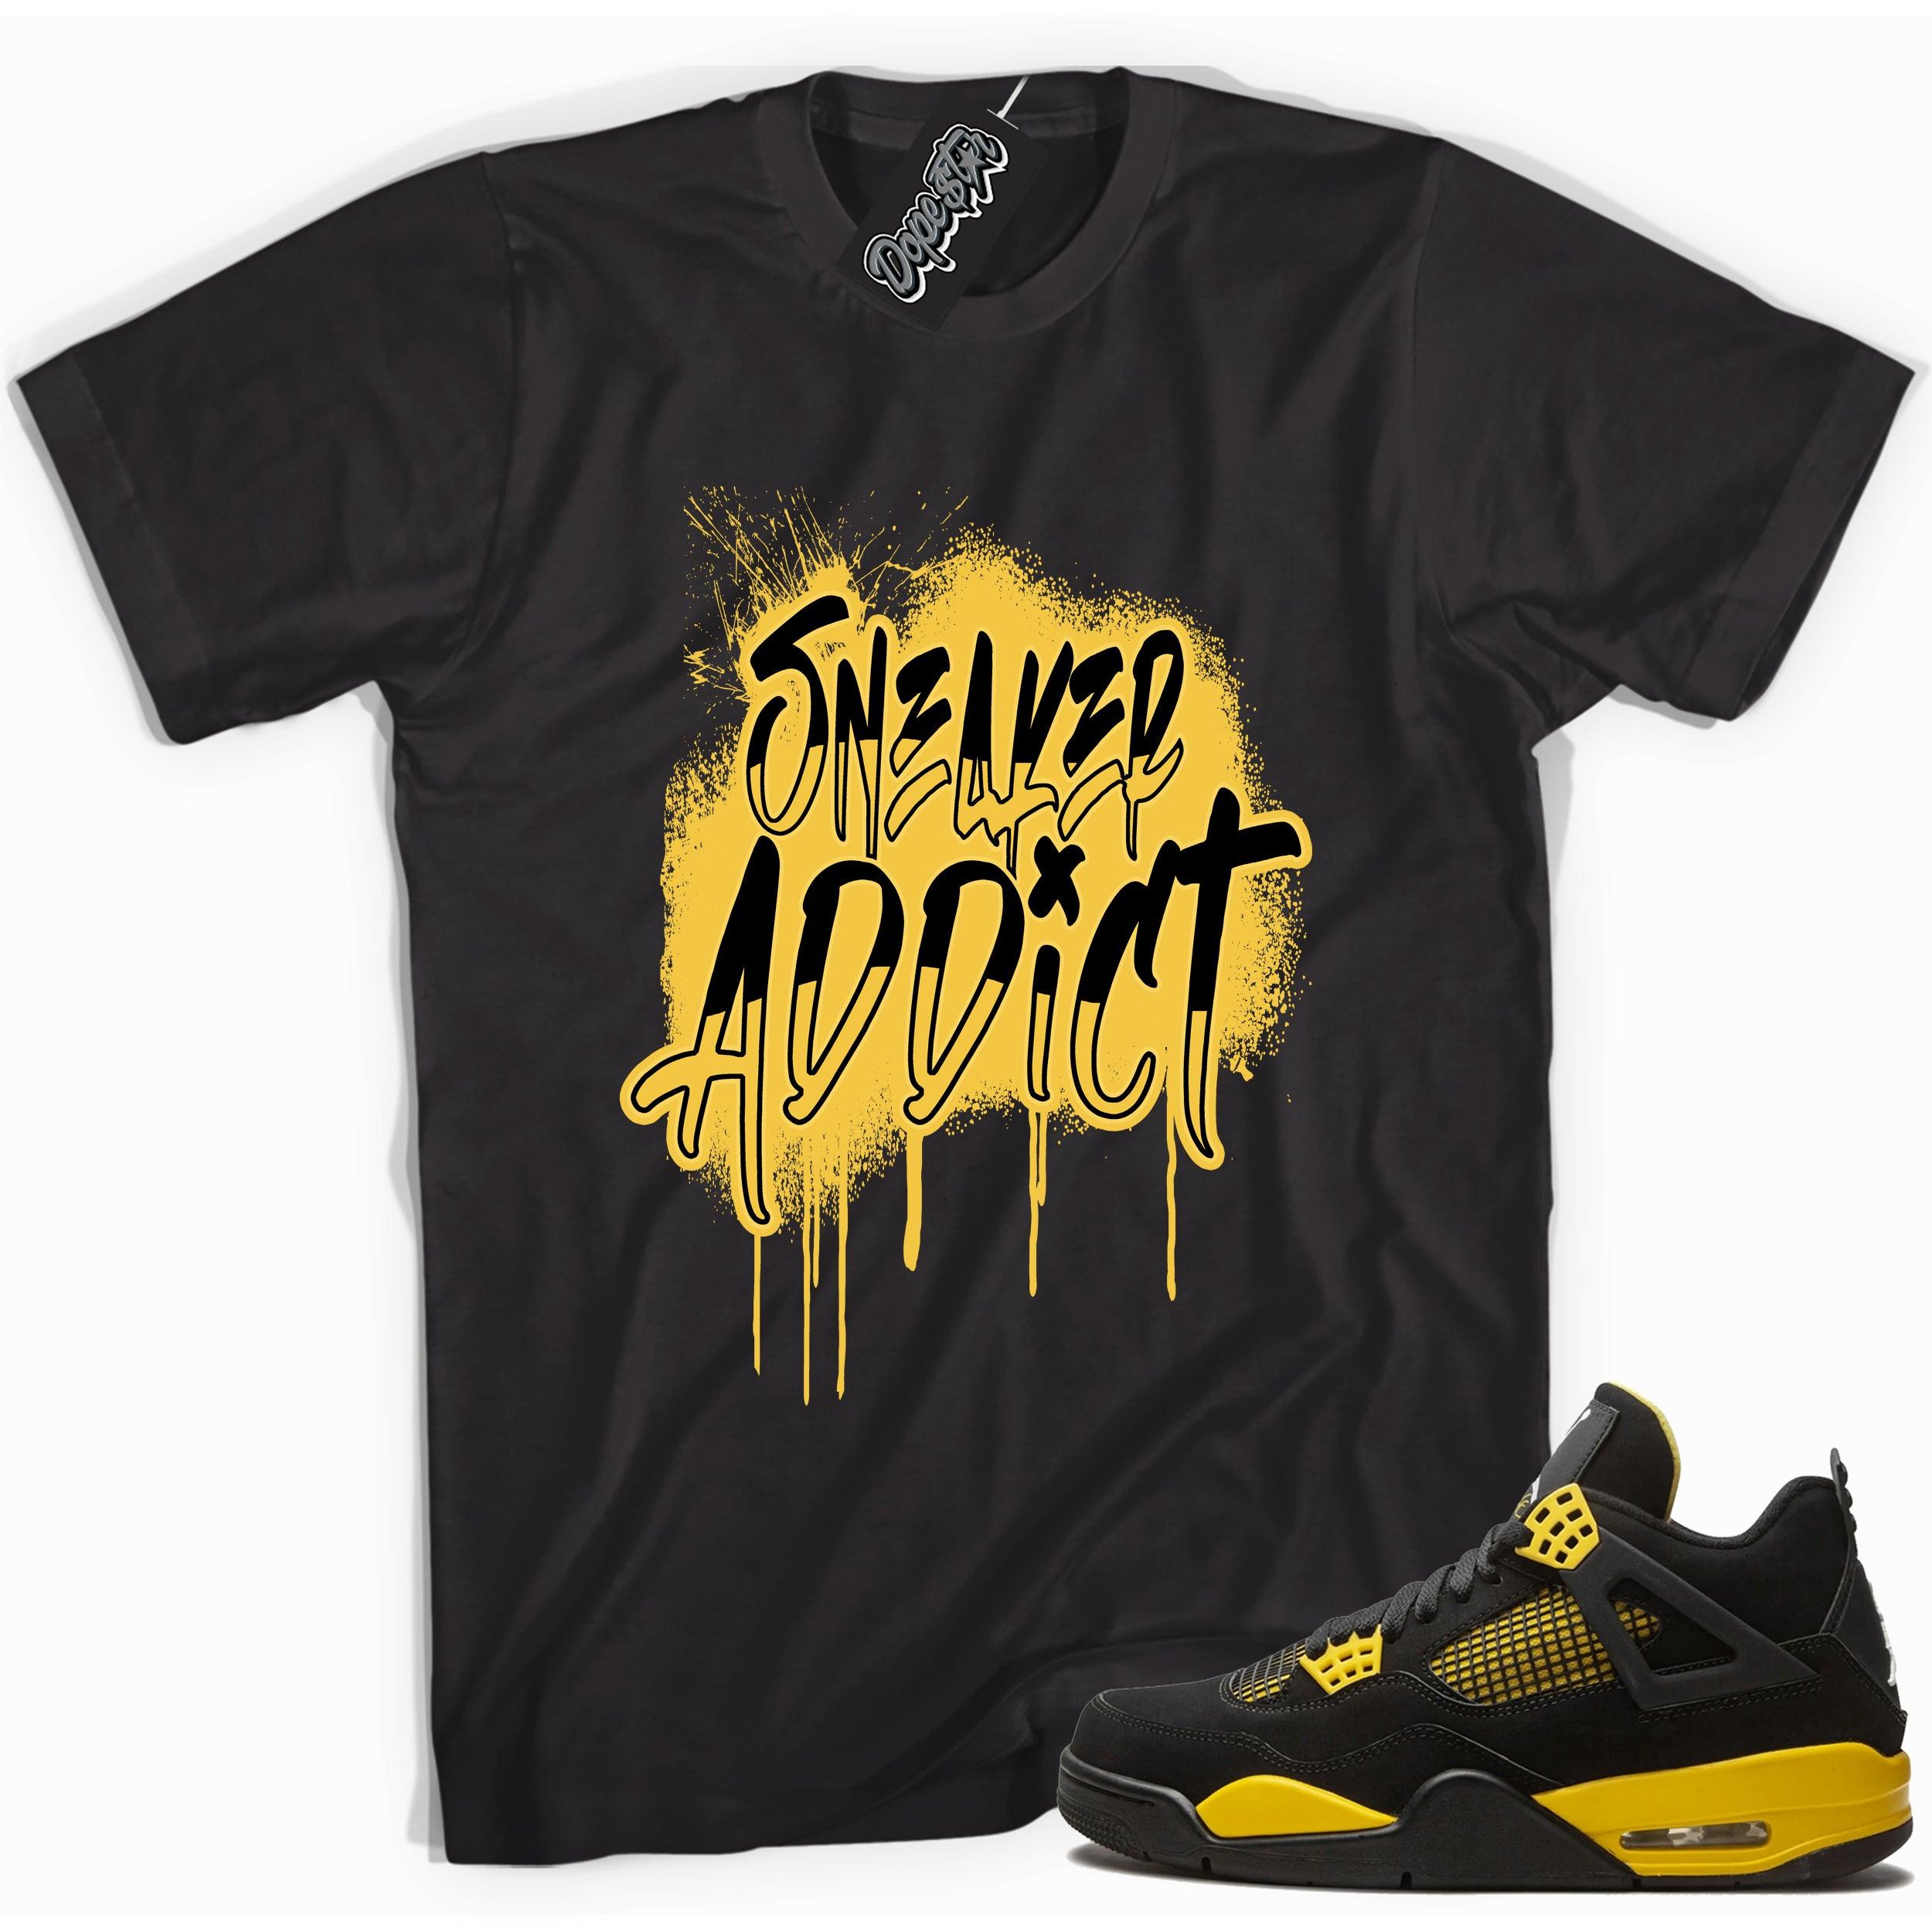 Cool black graphic tee with 'sneaker addict' print, that perfectly matches  Air Jordan 4 Thunder sneakers